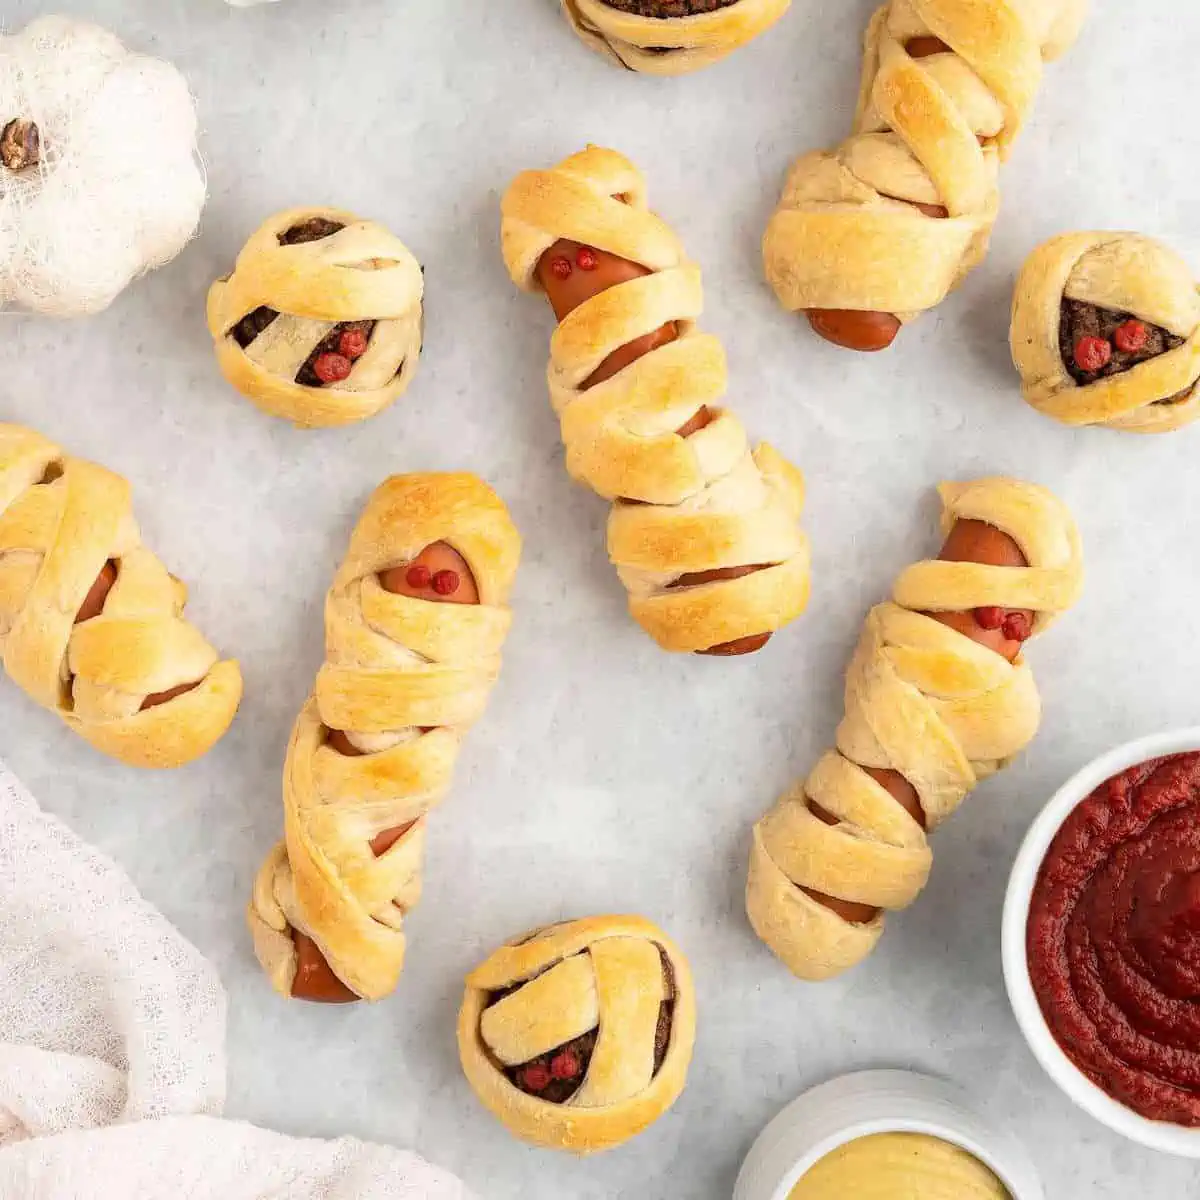 Vegan mummy dogs and ball scattered on a surface with bowls of dipping sauce to the side.